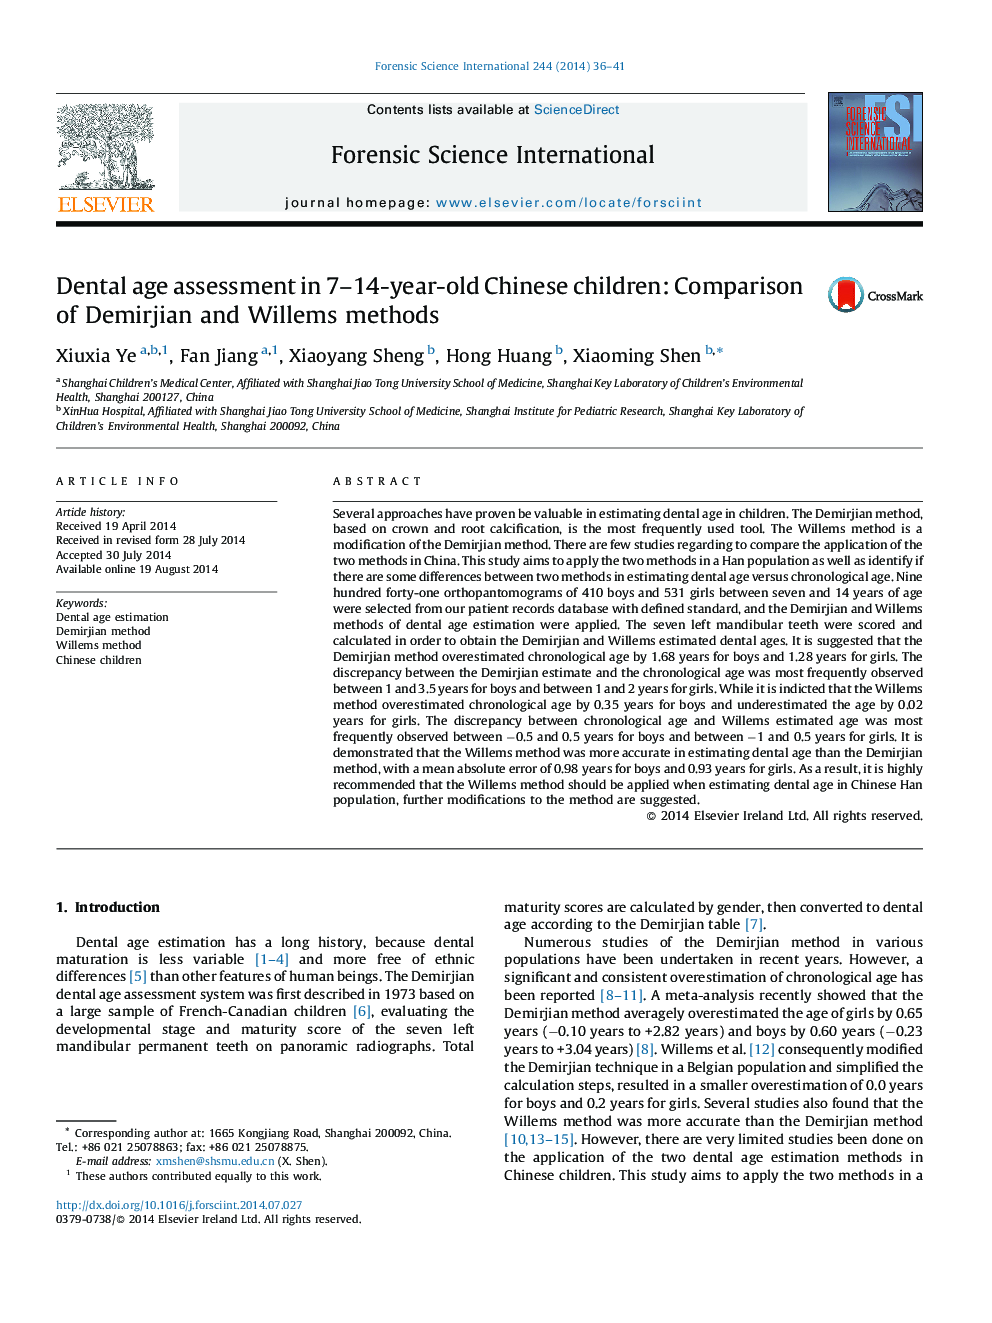 Dental age assessment in 7-14-year-old Chinese children: Comparison of Demirjian and Willems methods